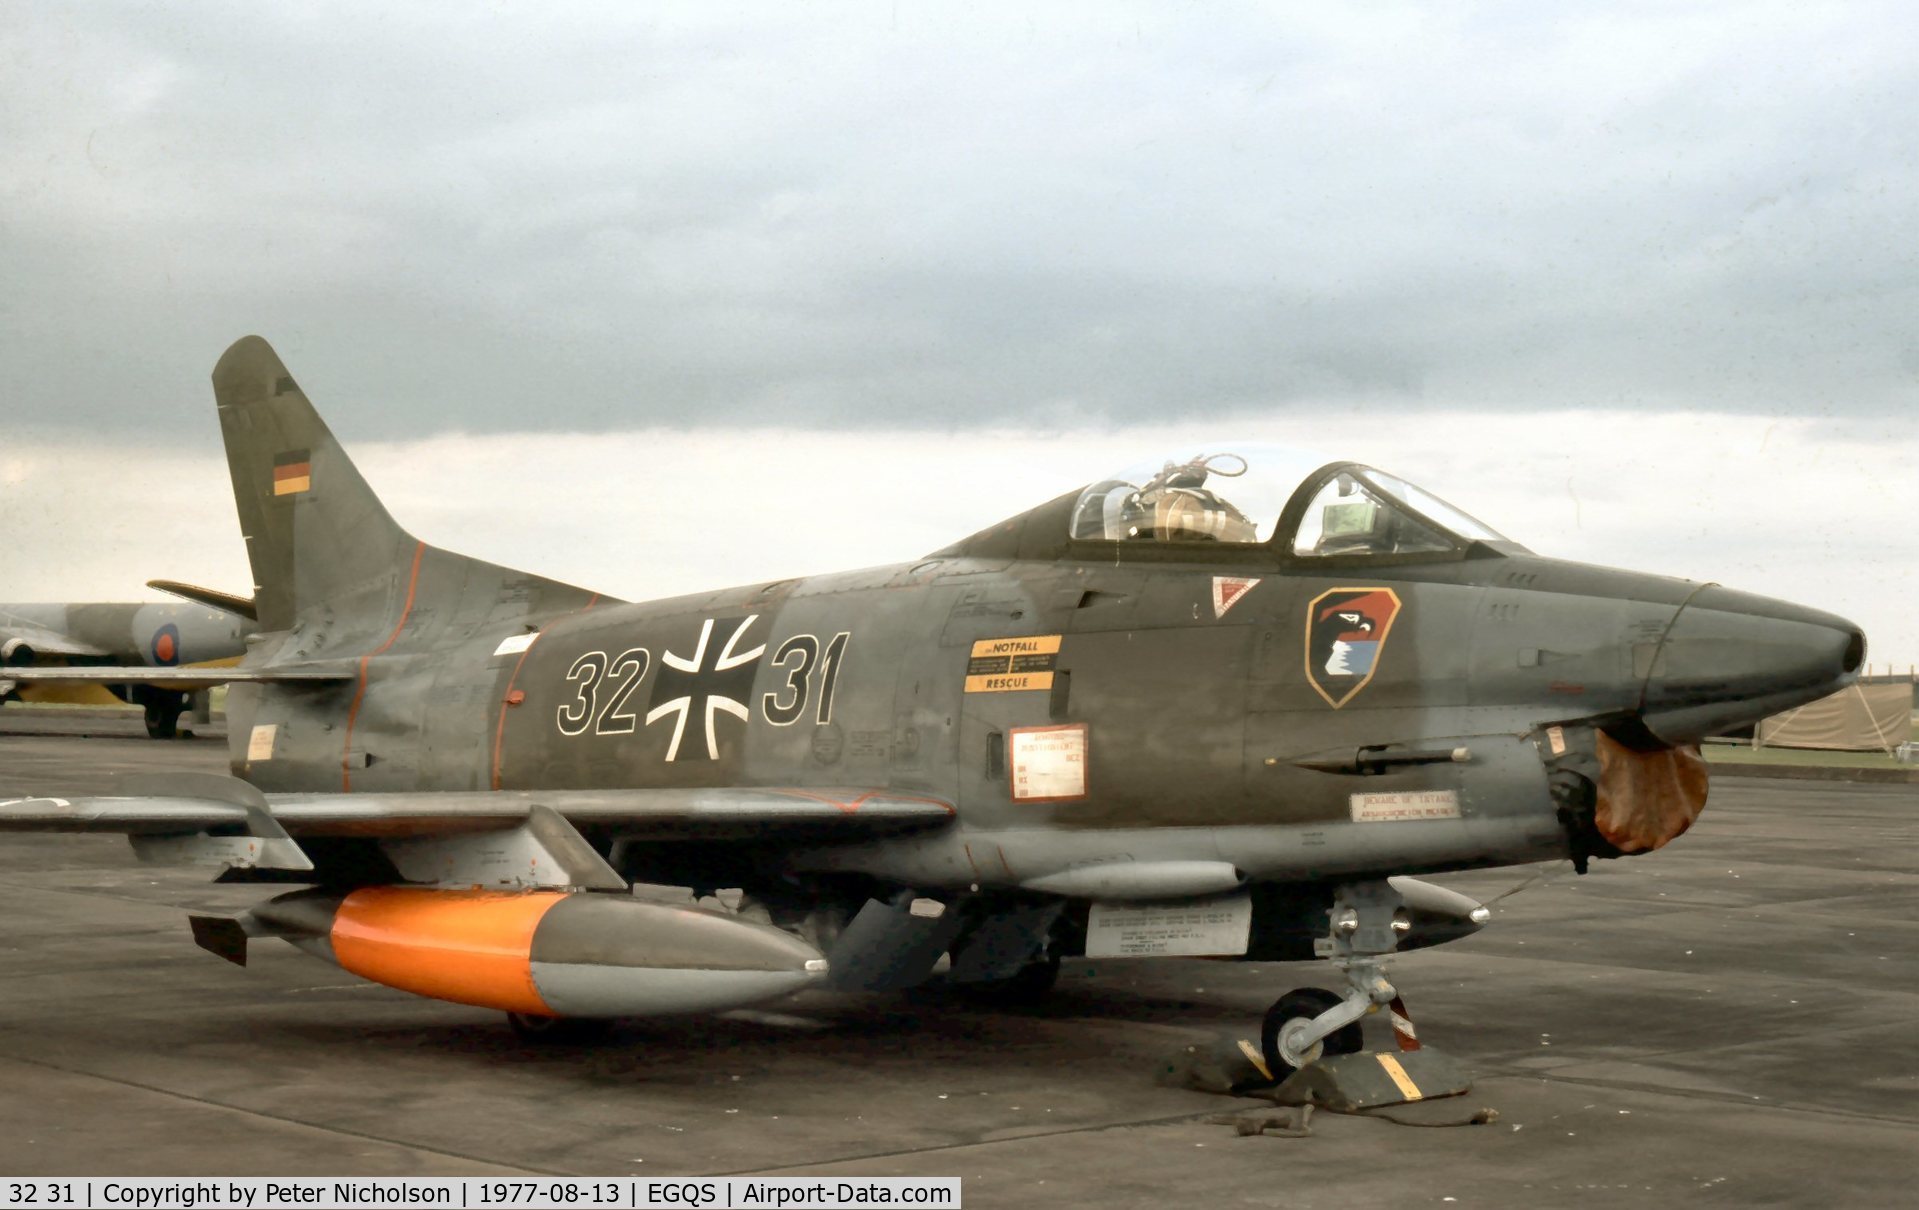 32 31, Fiat G-91R/3 C/N D500, Fiat G-91R-3 of LKG-41 at the 1977 RAF Lossiemouth Open Day.